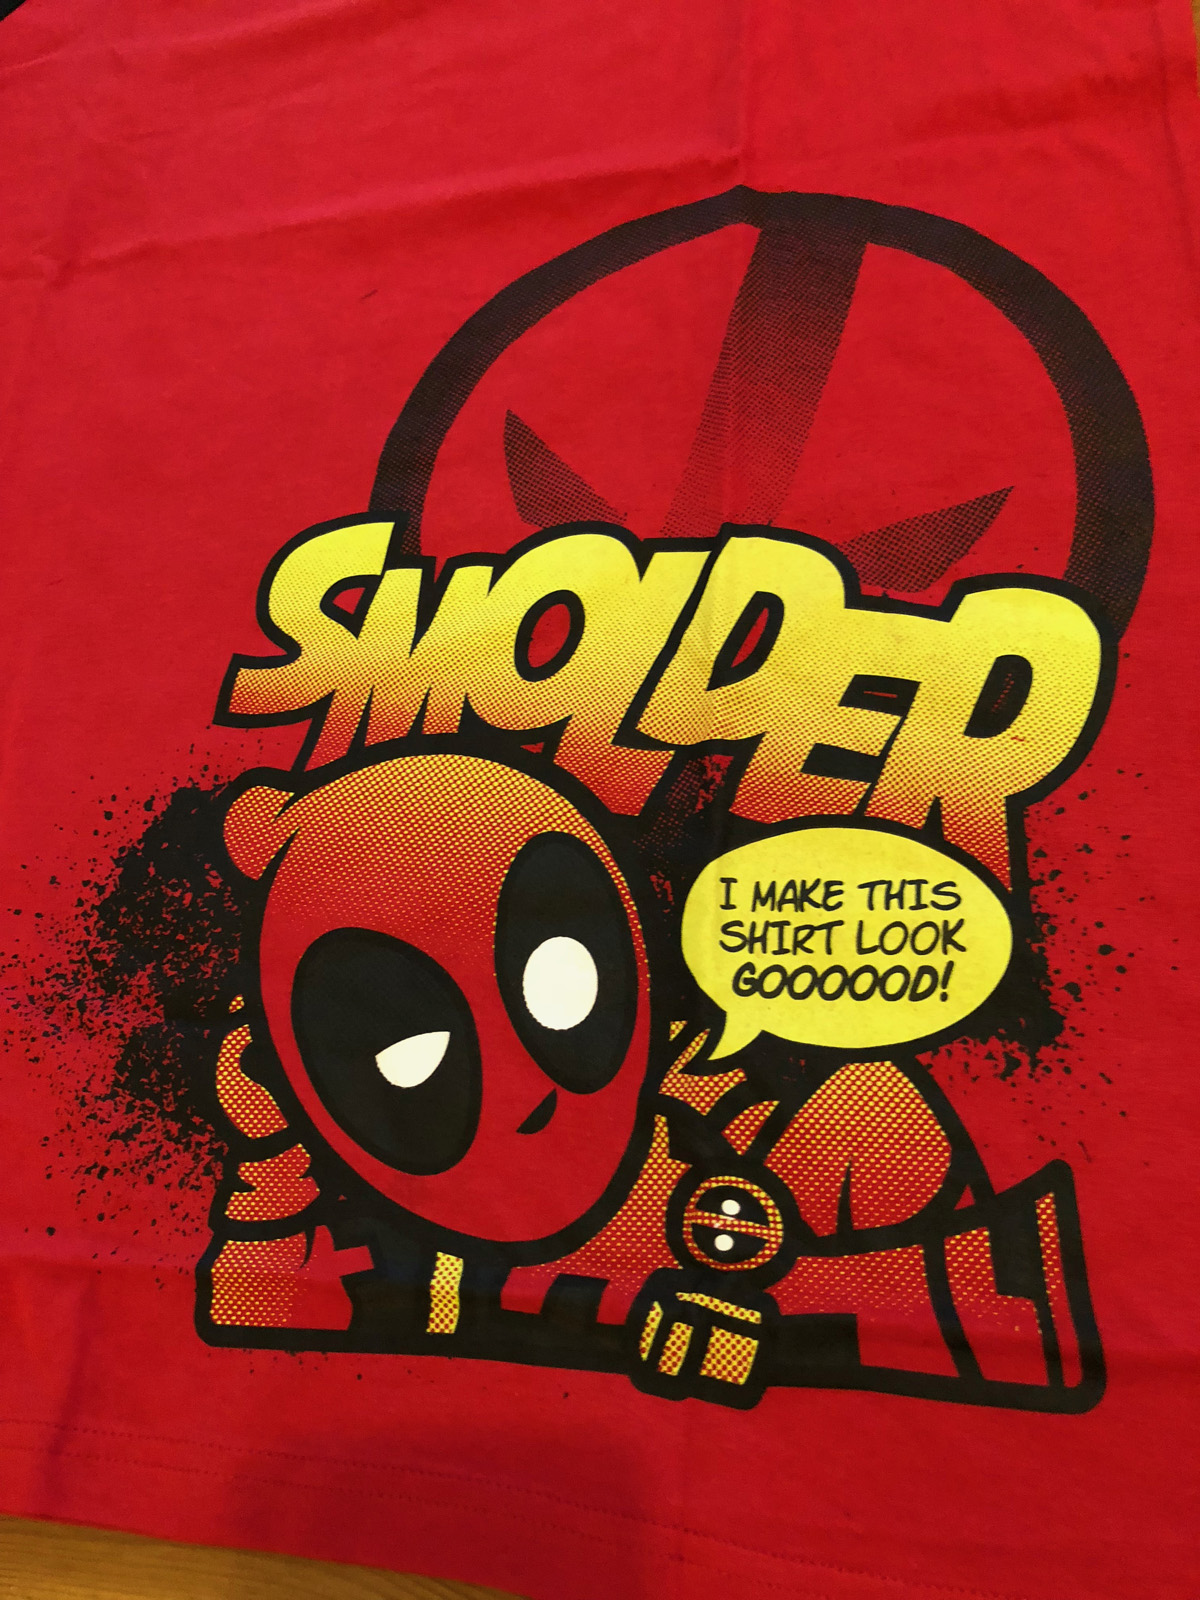 May Loot Crate DX Deadpool Edition